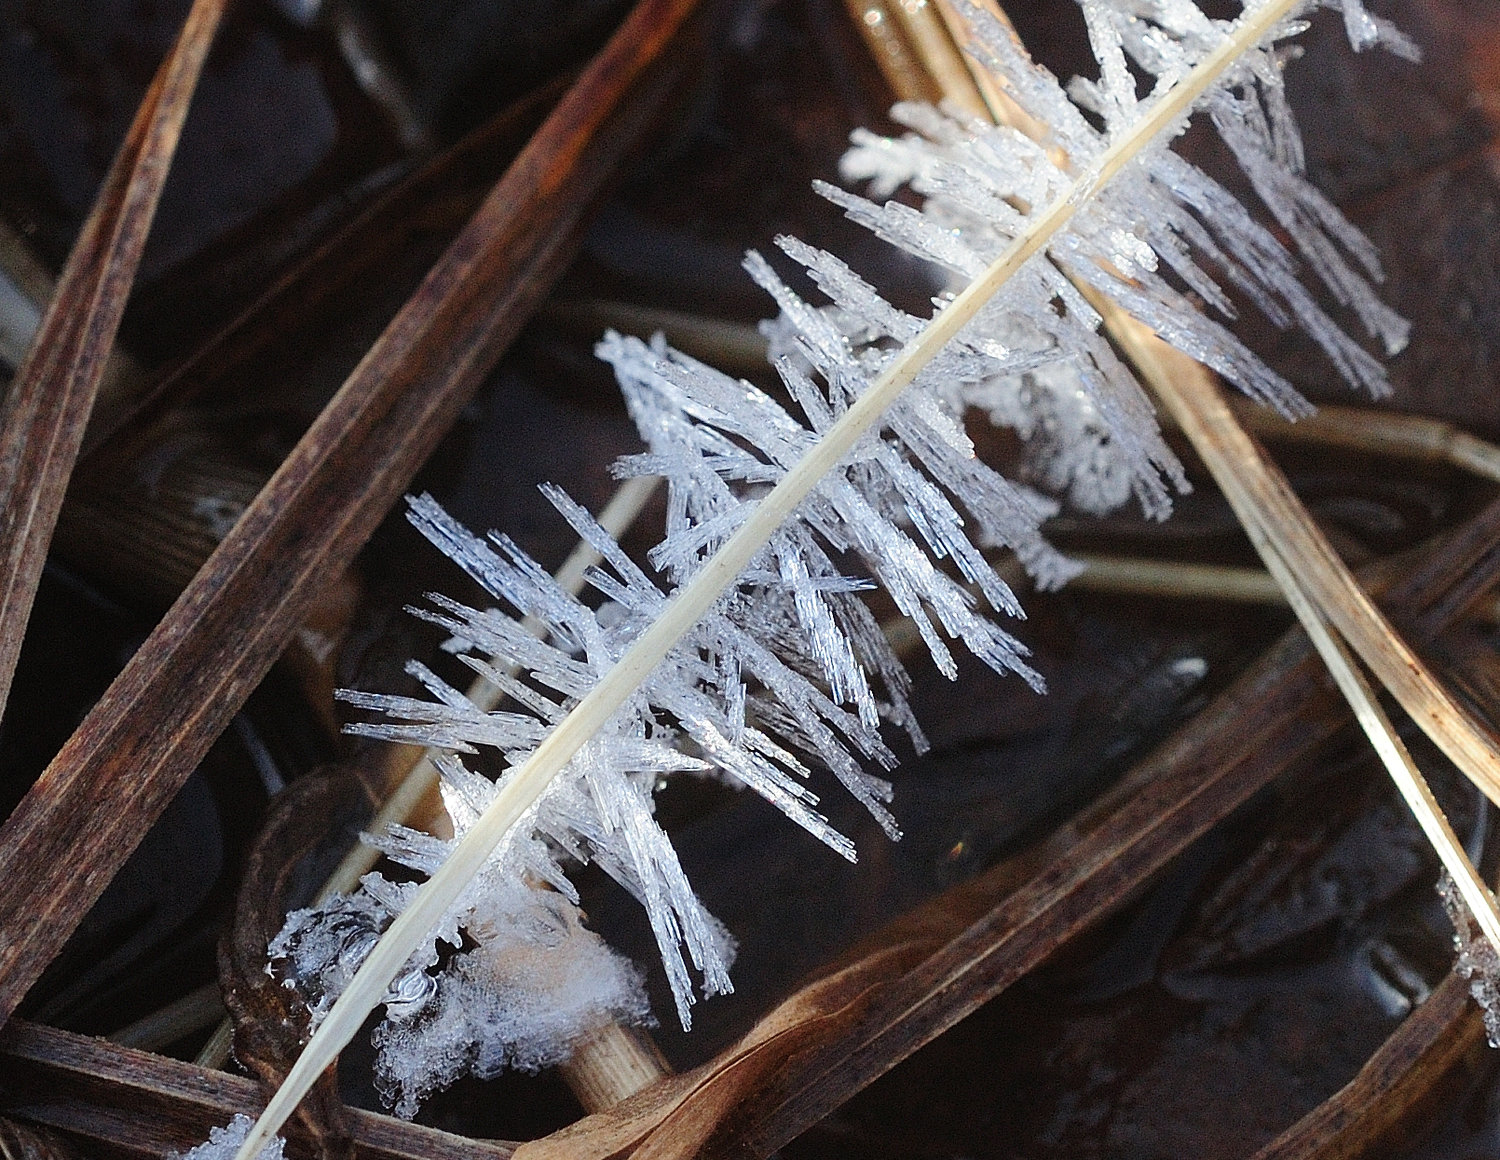 Hoarfrost forms when water vapor, which is also below freezing, condenses on plants or blades of grass. The crystalline properties of water are evident when looking at the frozen needles on this blade of grass. Areas that have more humidity, such as stream banks, are good areas to find this phenomenon.